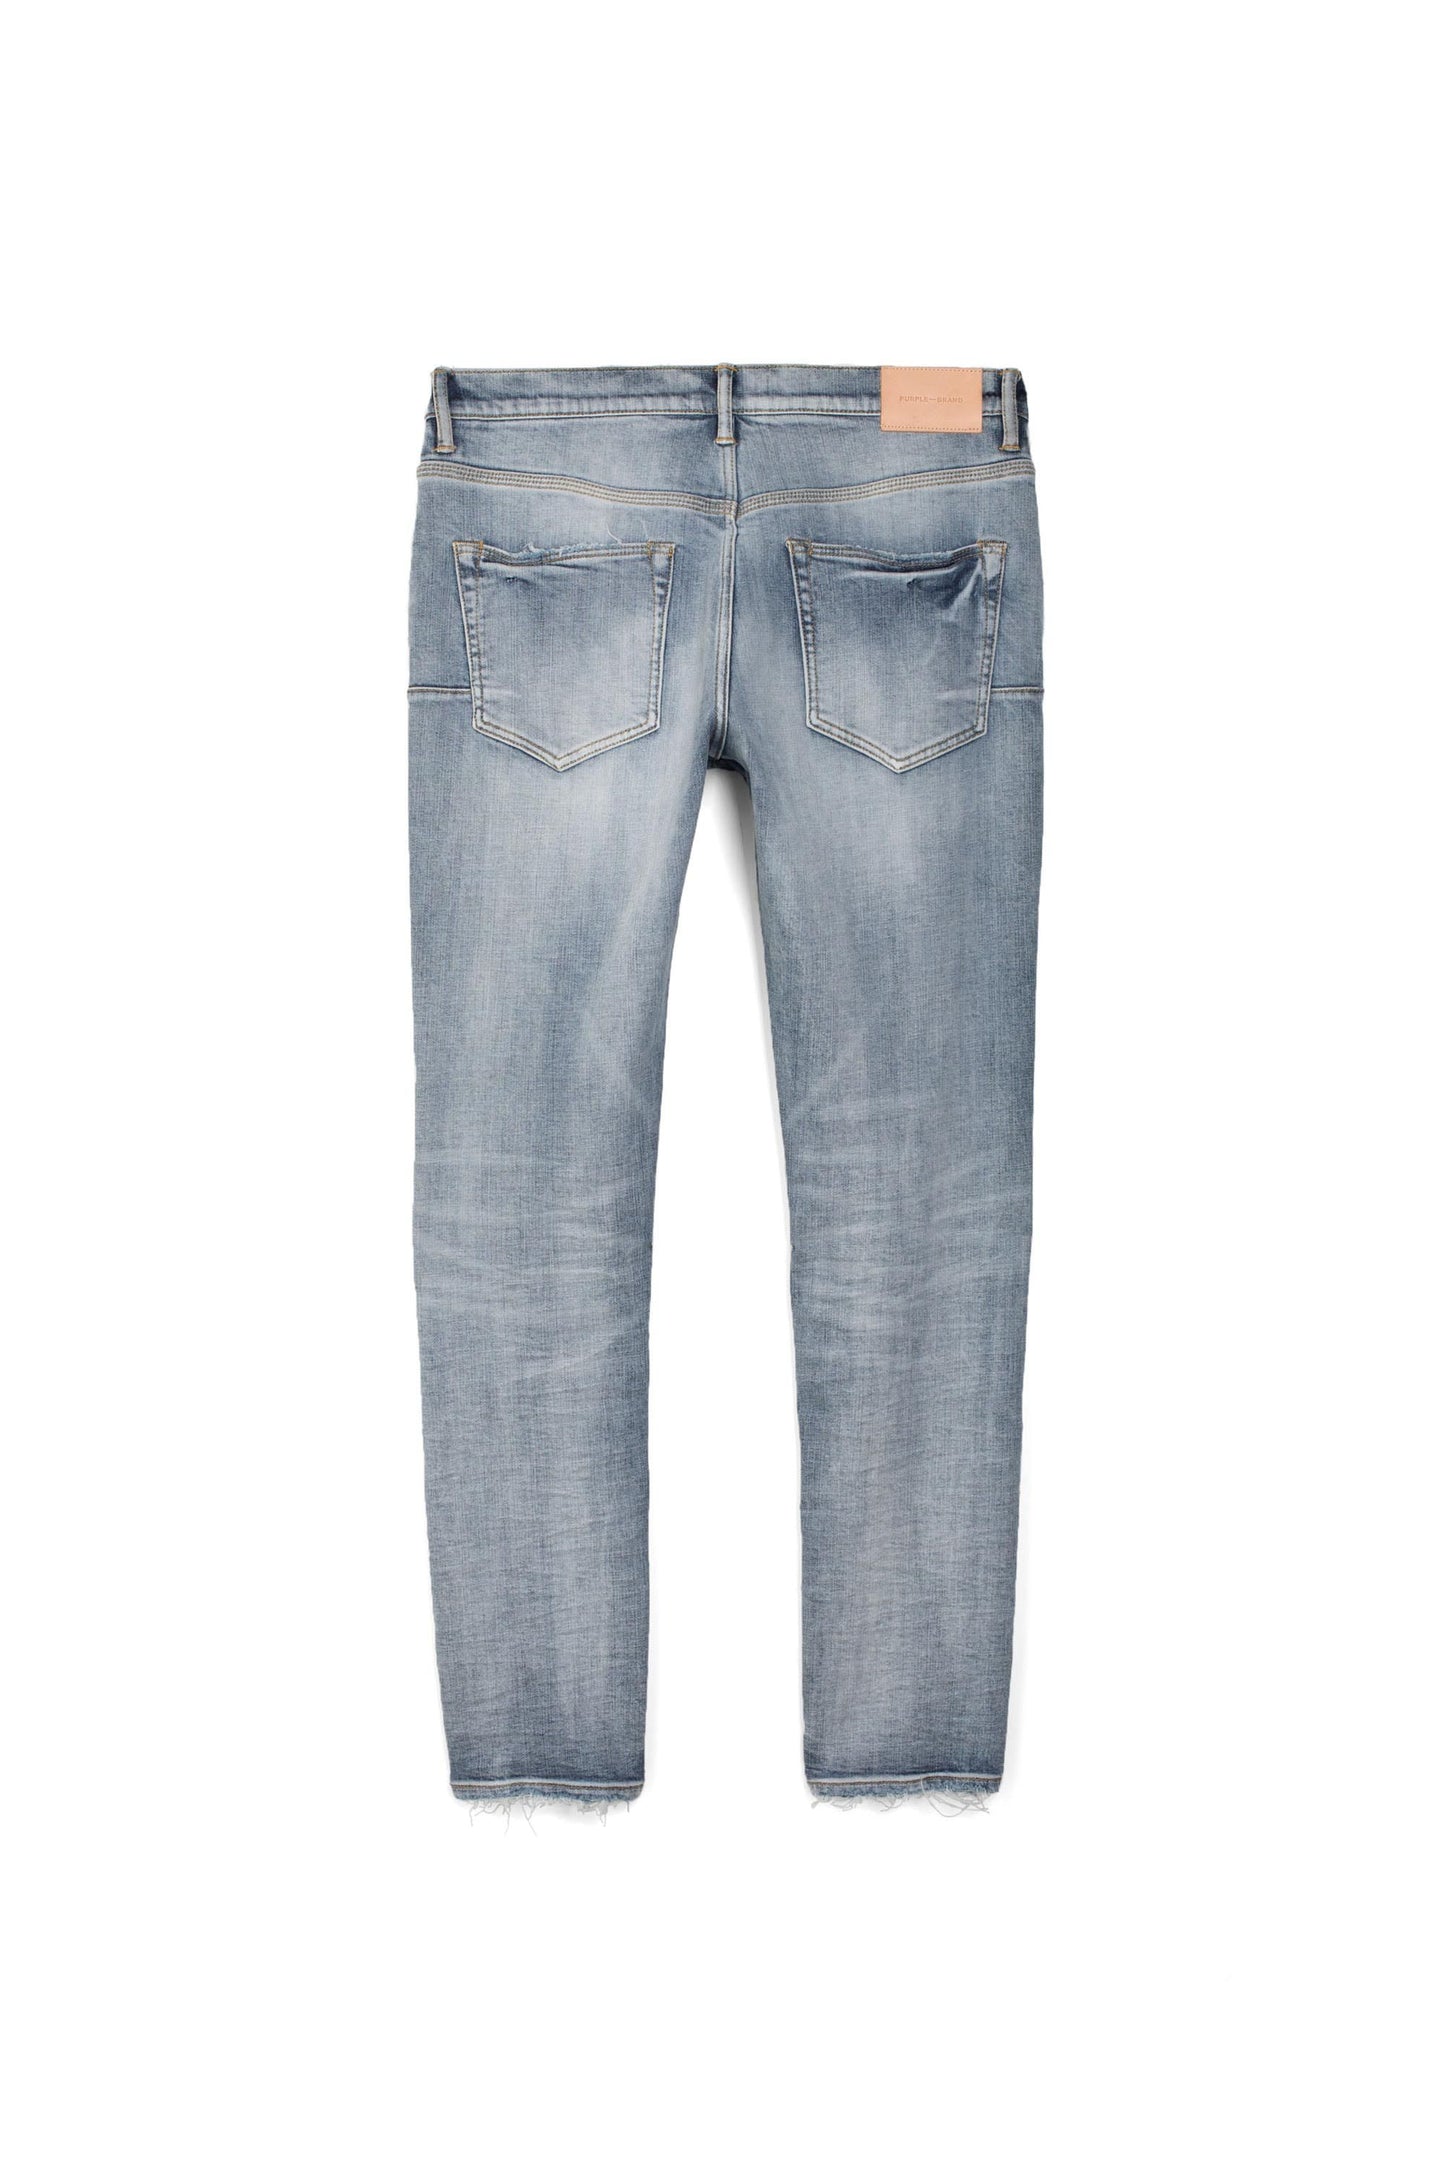 P002 MID RISE SLIM JEAN - Indigo Marble Patched